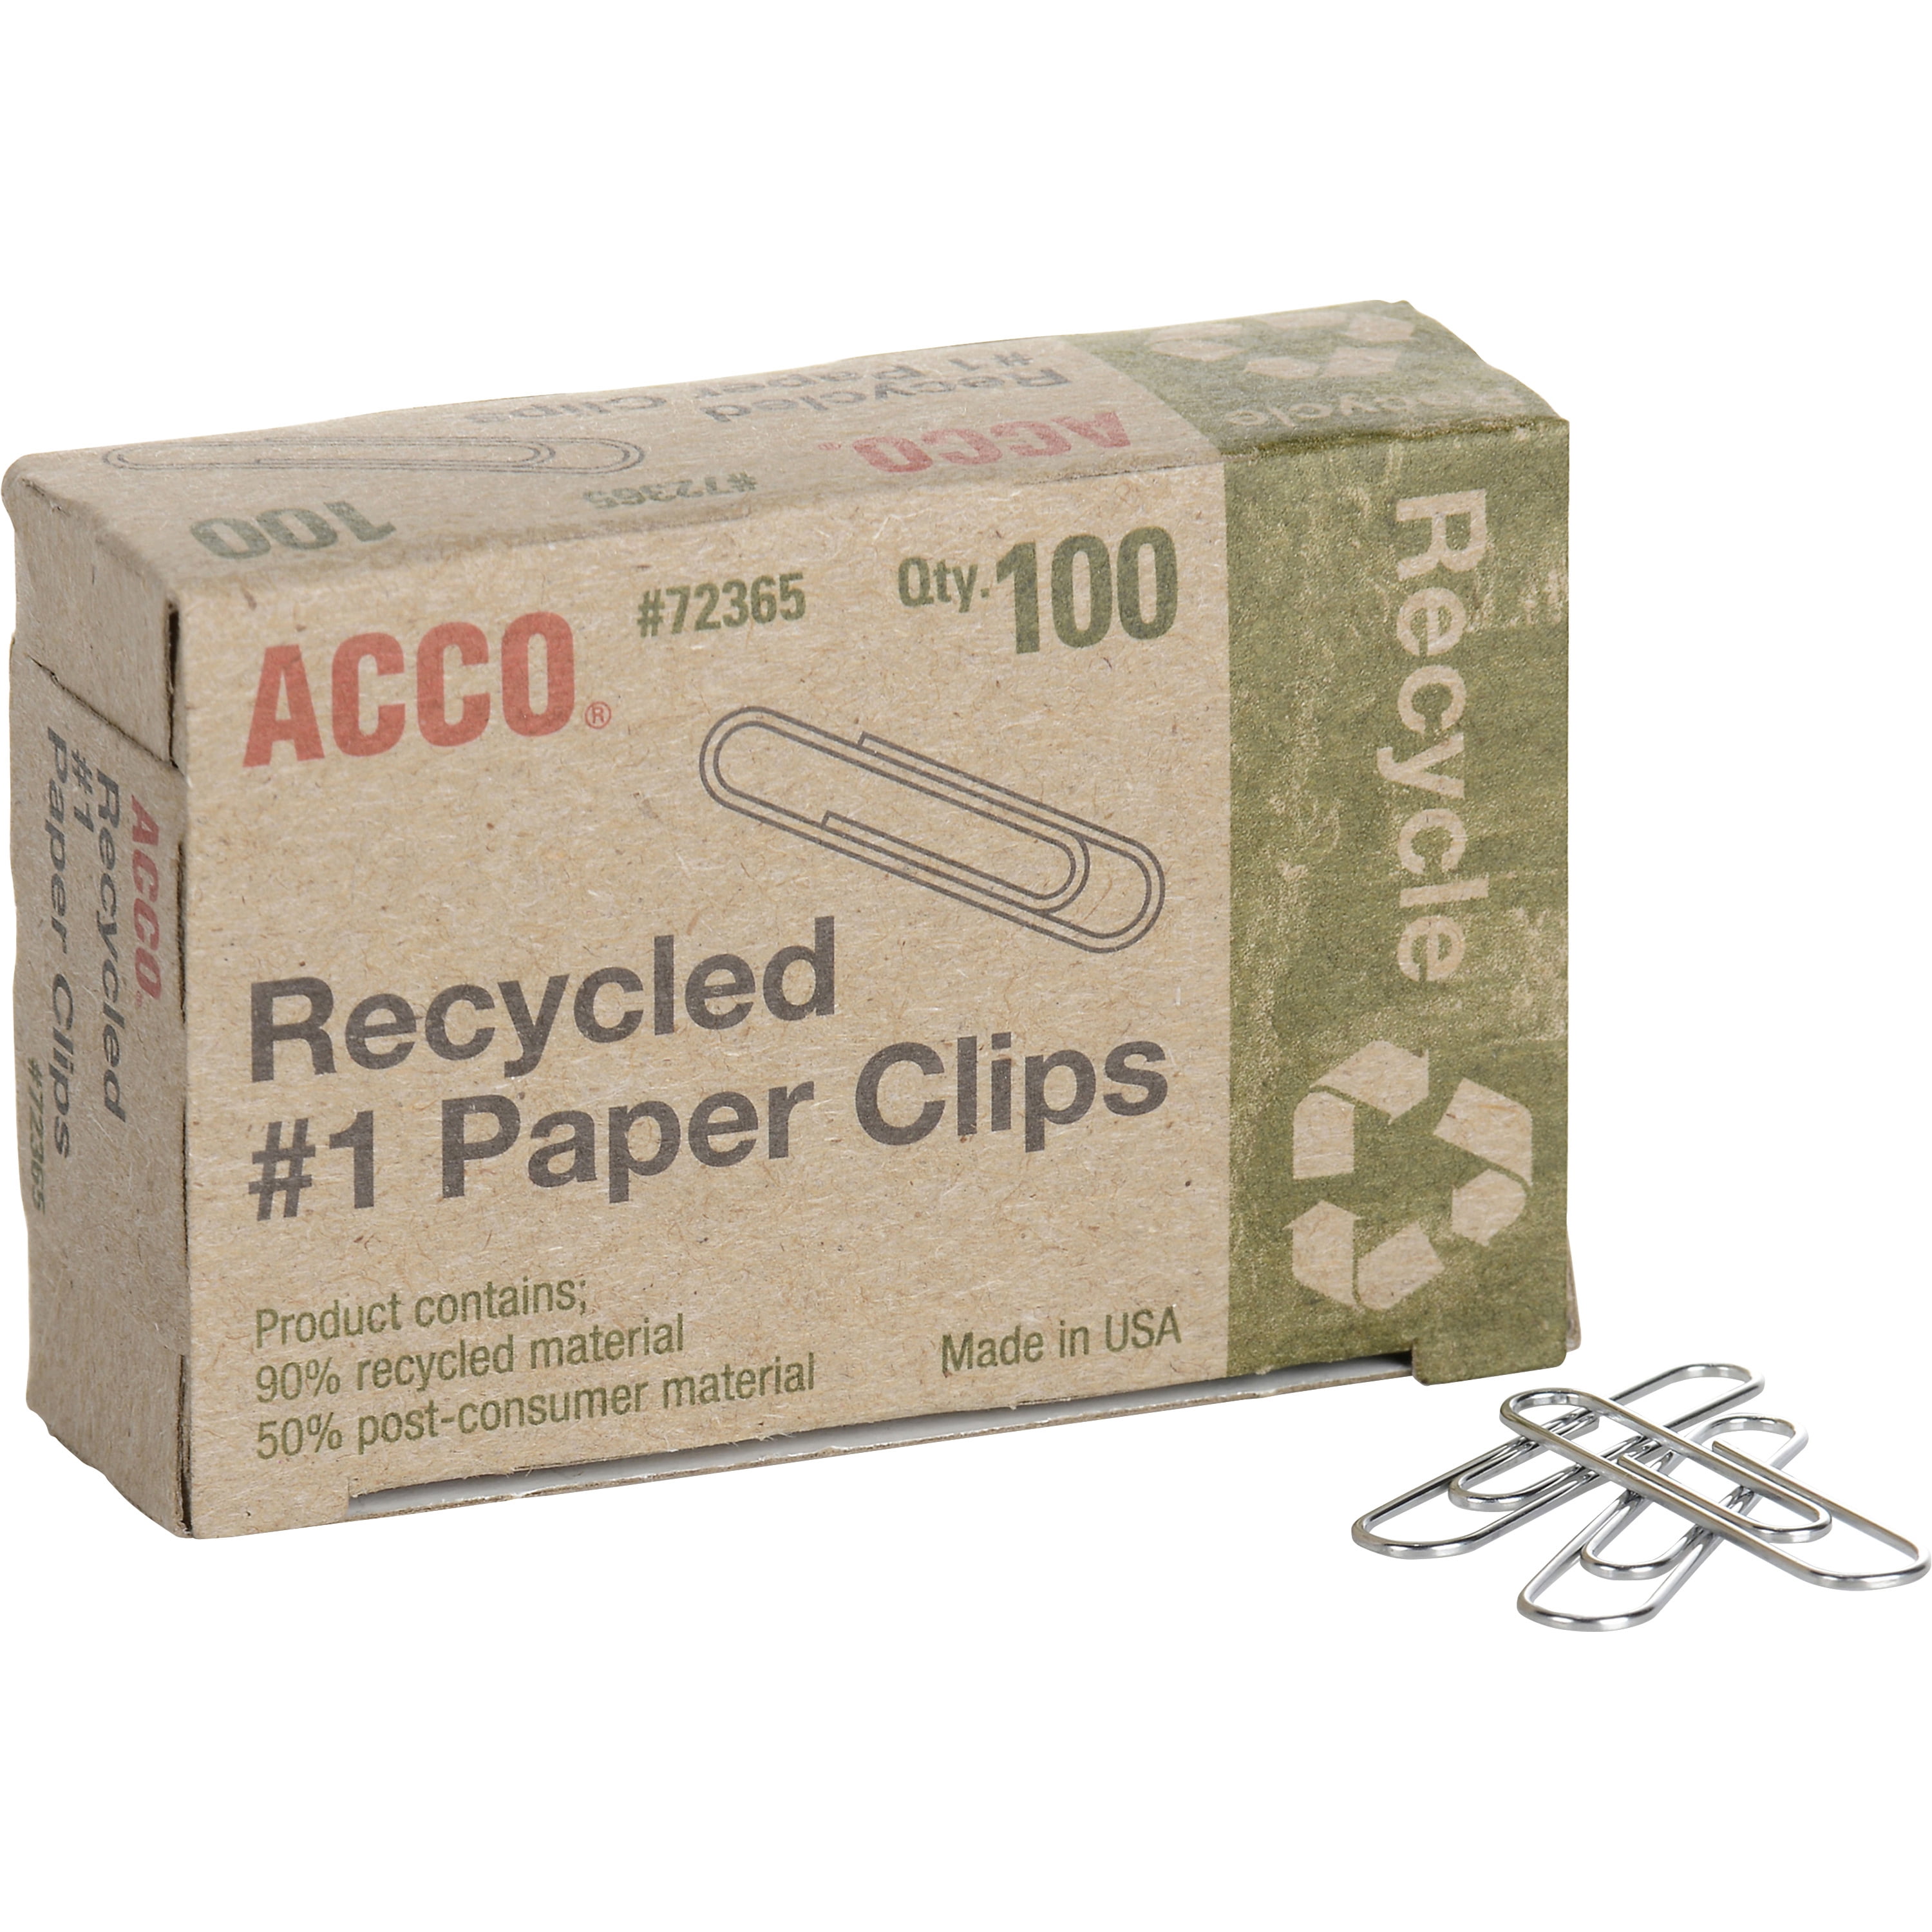 Acco Economy #3 Paper Clips, Small, Smooth Finish, 15/16 Inches Long, Silver, 1 Box of 100 Clips (72320)